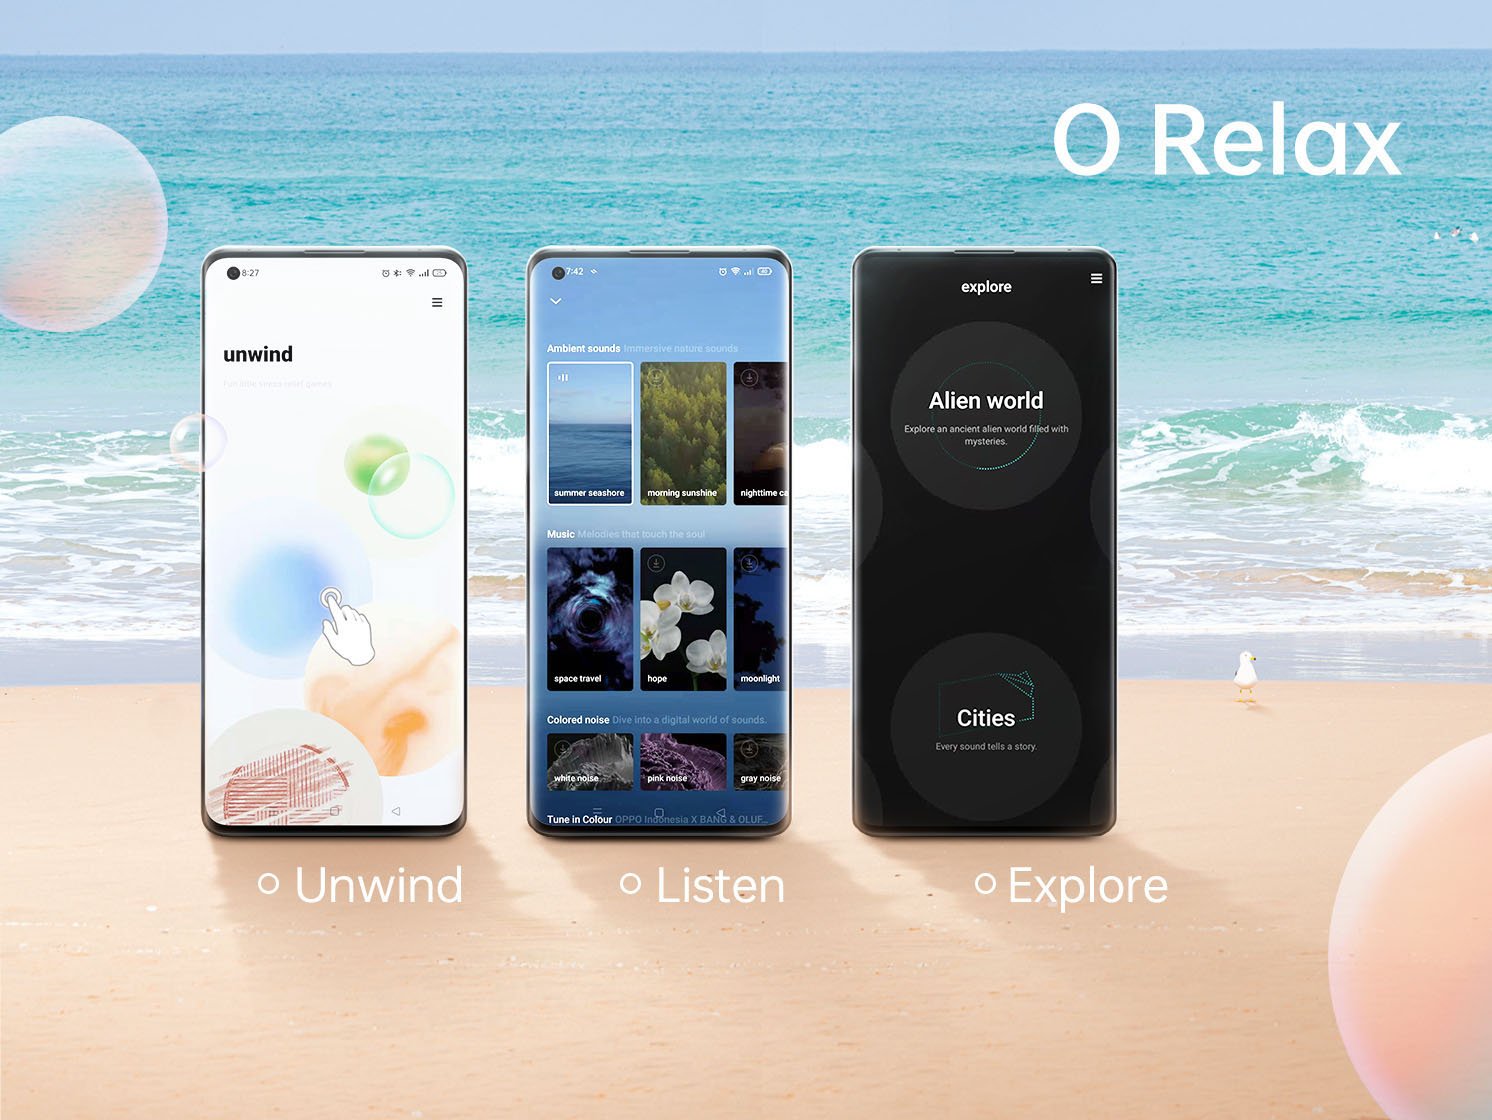 OPPO Find X5 series is equipped with the newest version of O Relax, which brings a Moment of Calm for the users